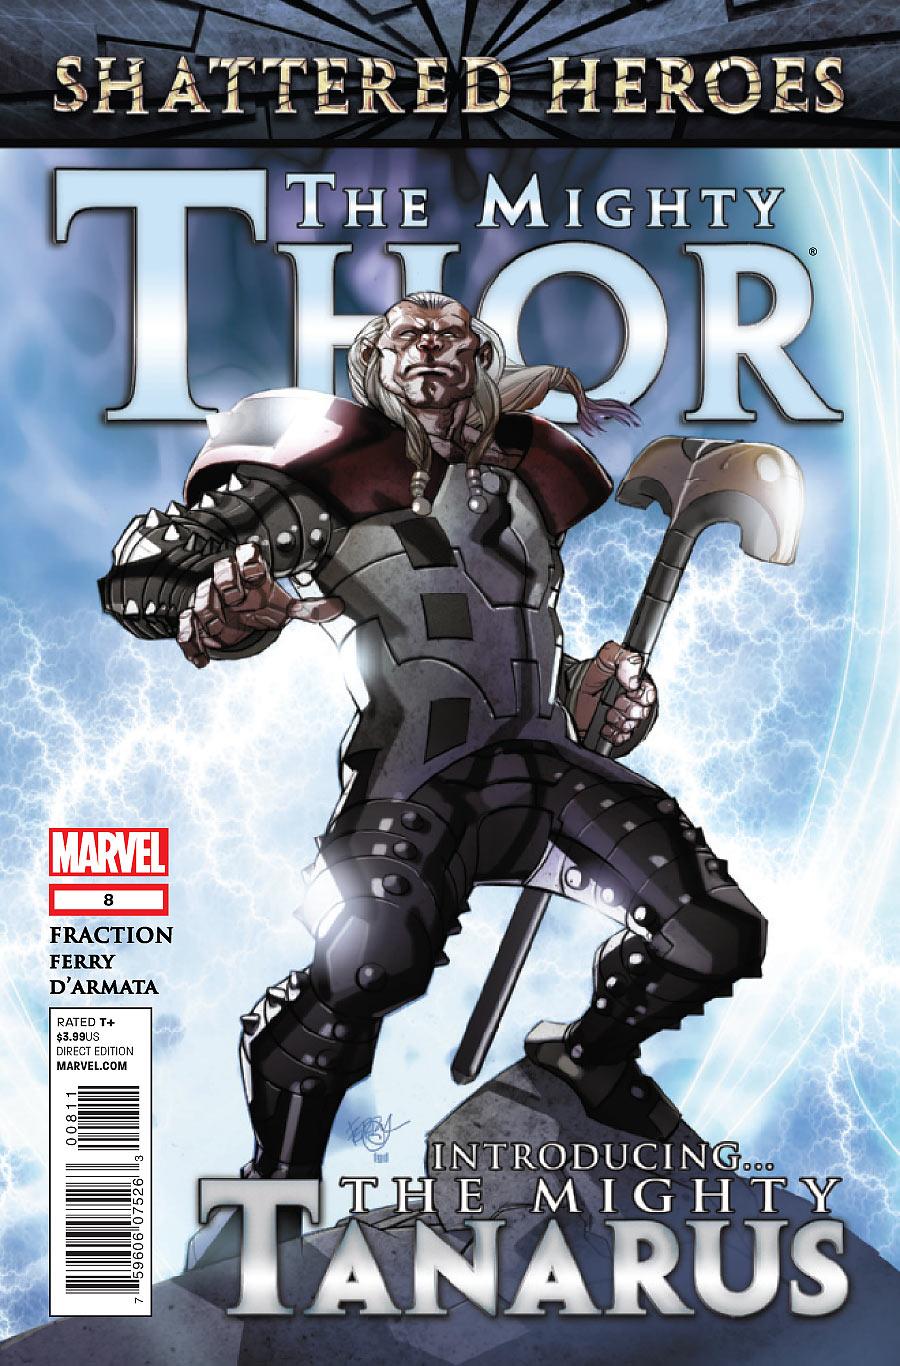 The Mighty Thor Vol. 1 #8